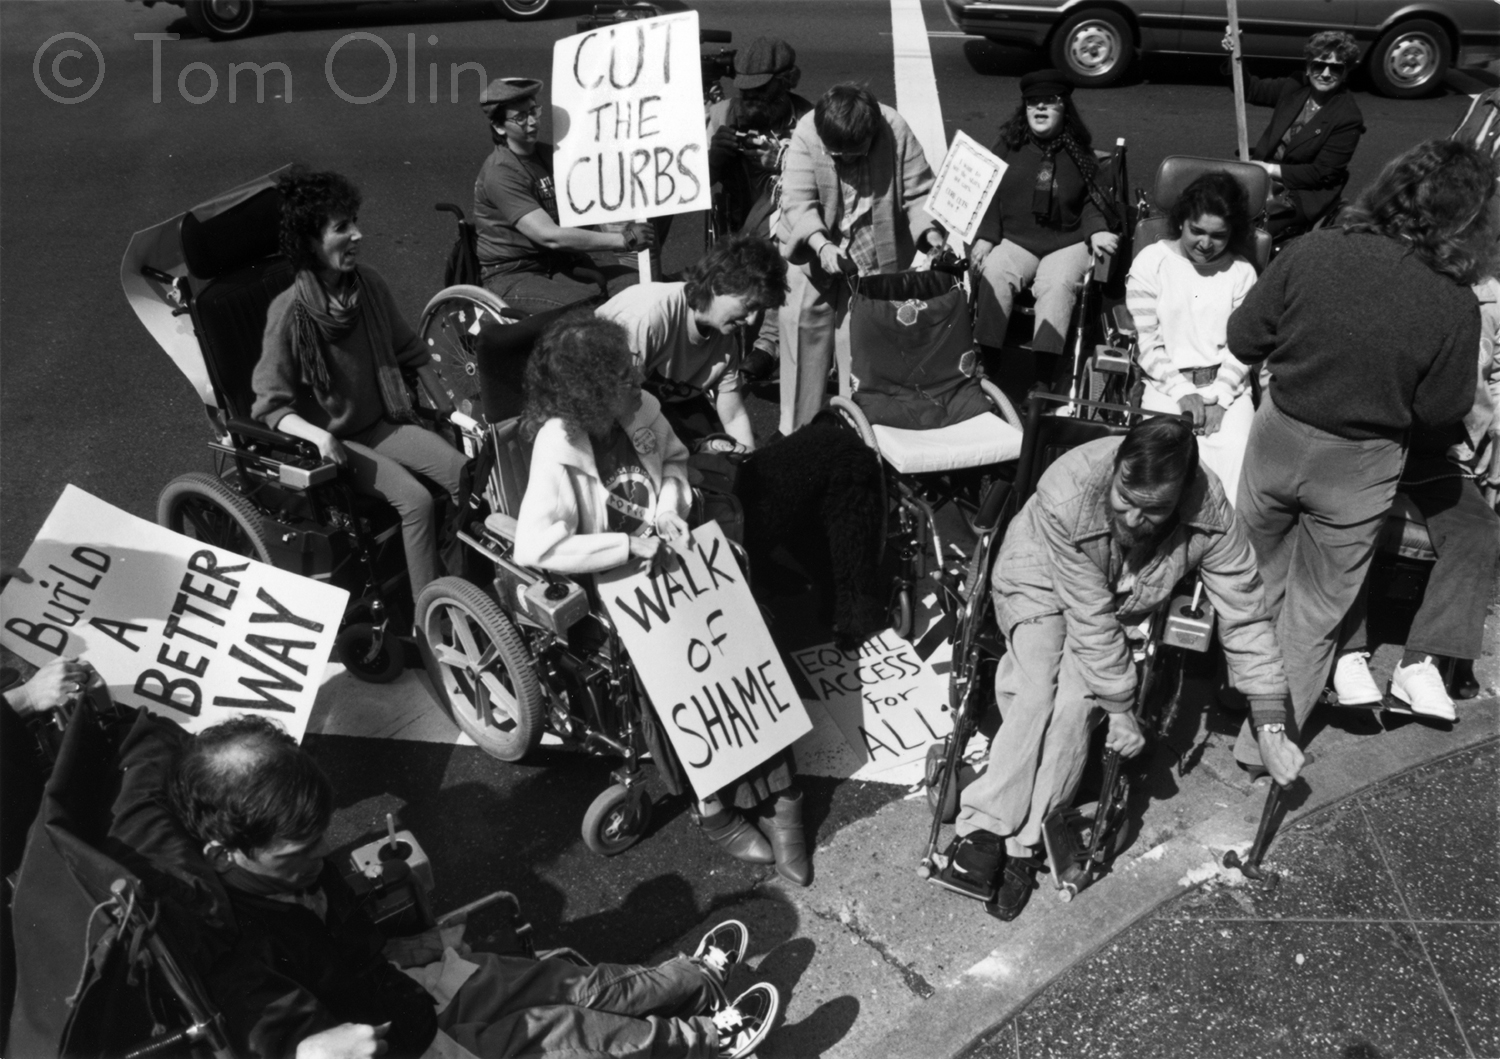 A black and white photo of a group of protestors in wheelchairs. One is using a sledgehammer to break up the curb. Several protestors hold signs saying “cut the curbs”; “build a better way”; and “walk of shame.”